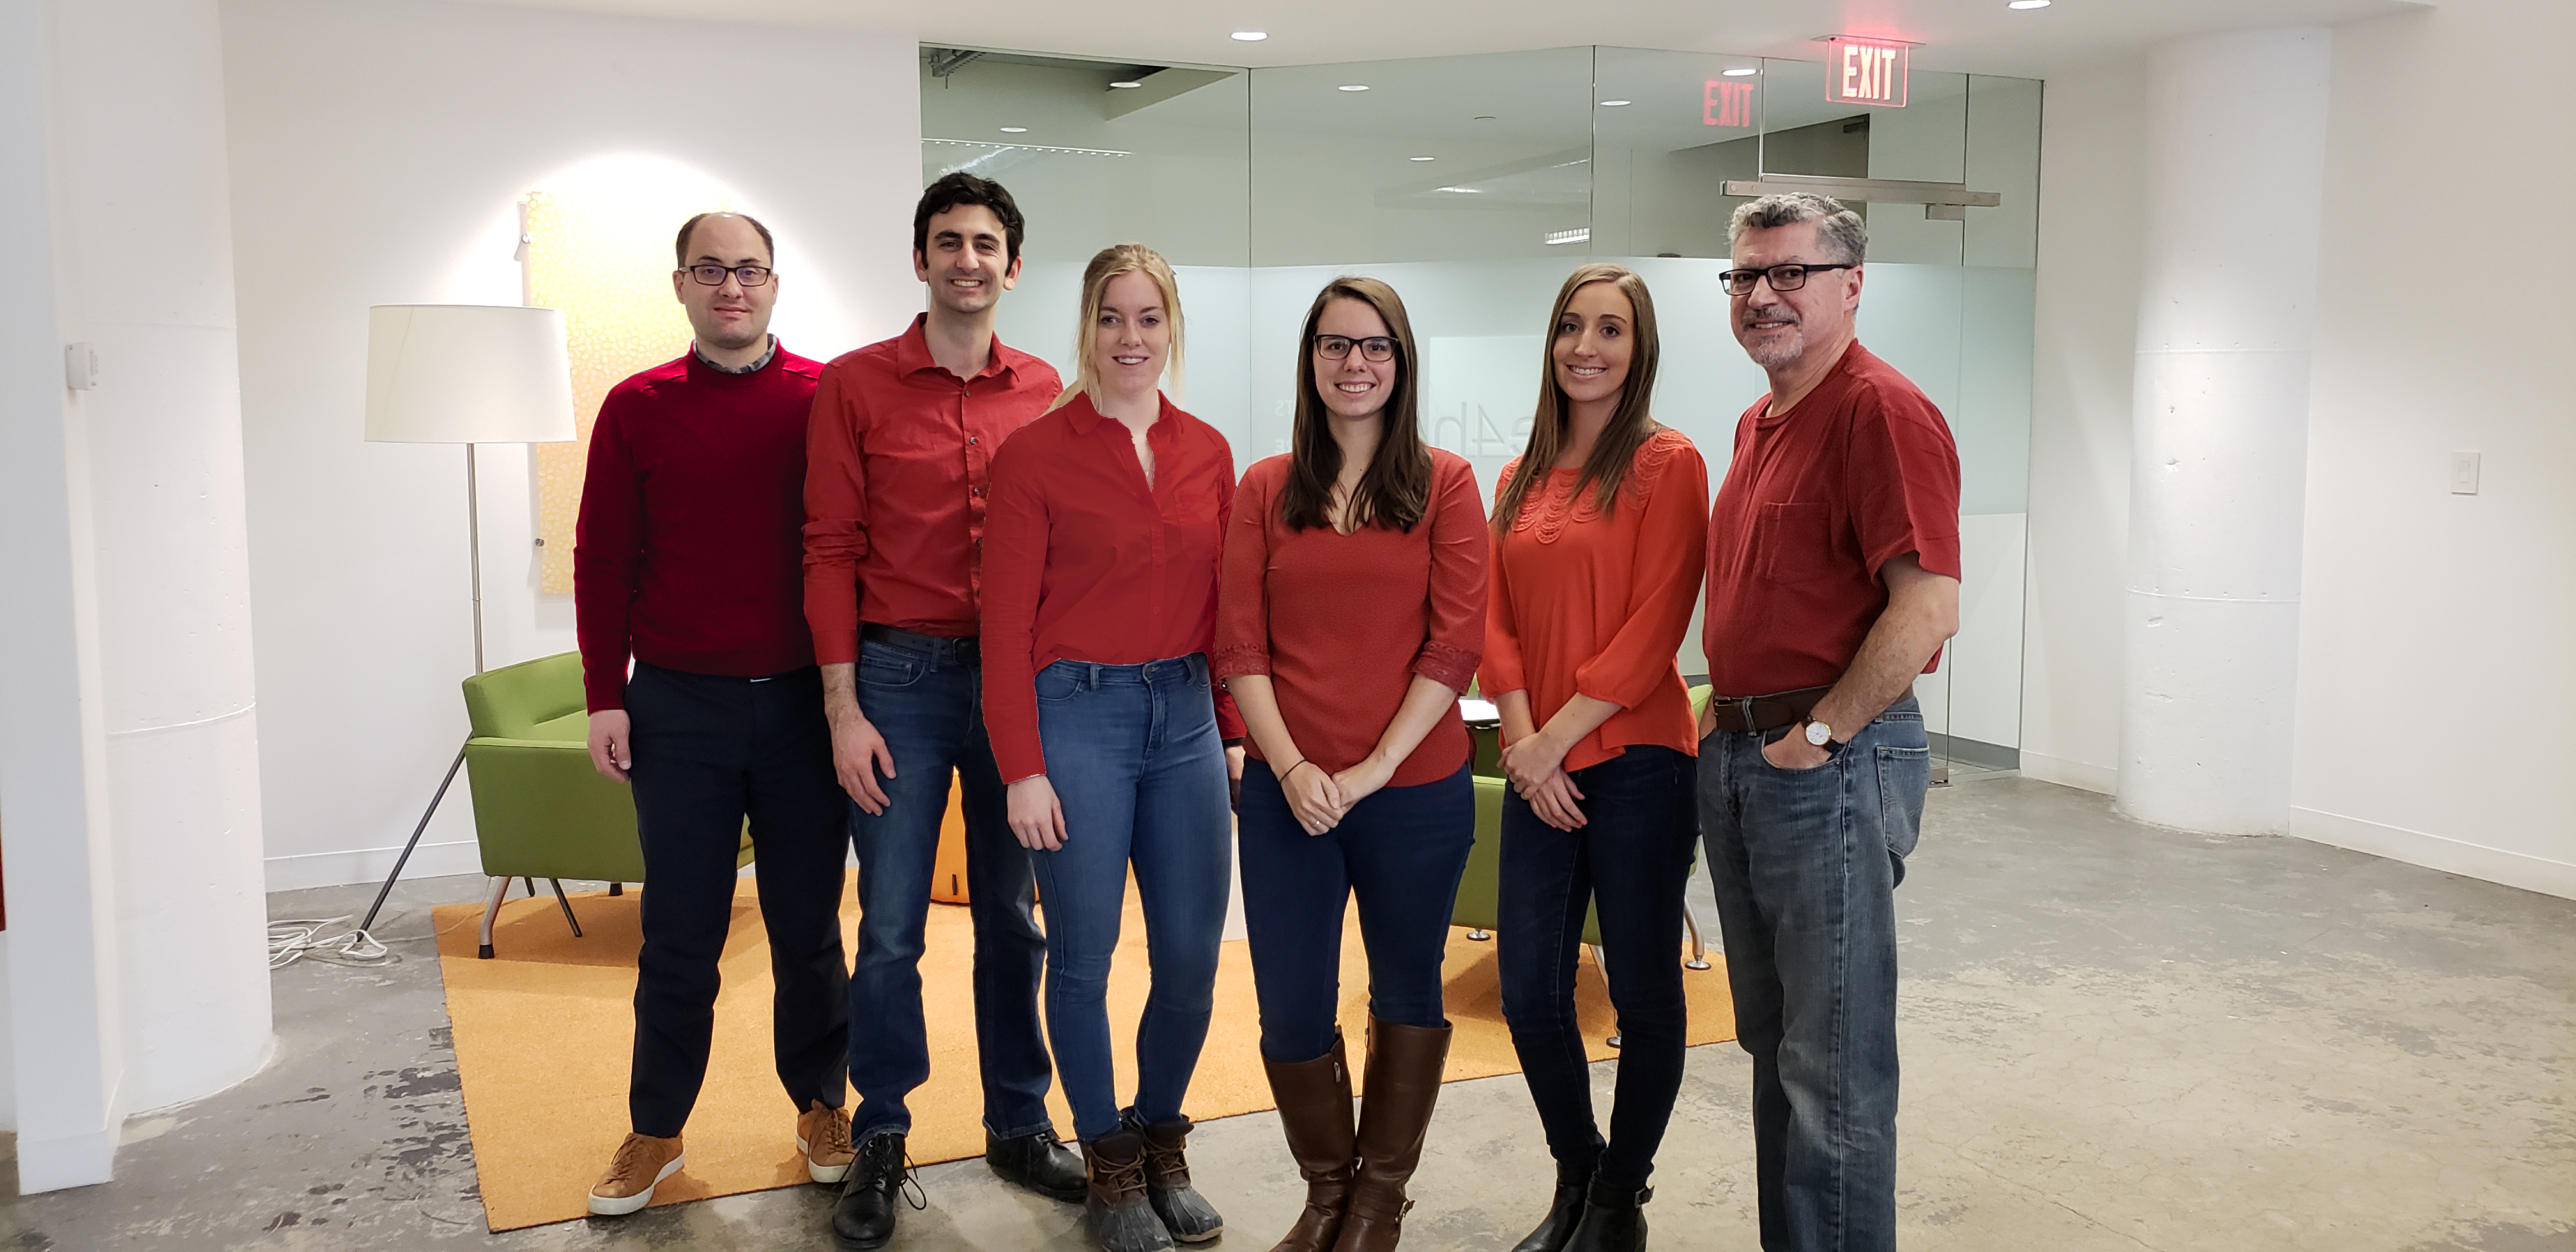 Boston team in red shirts and jeans on wear red day